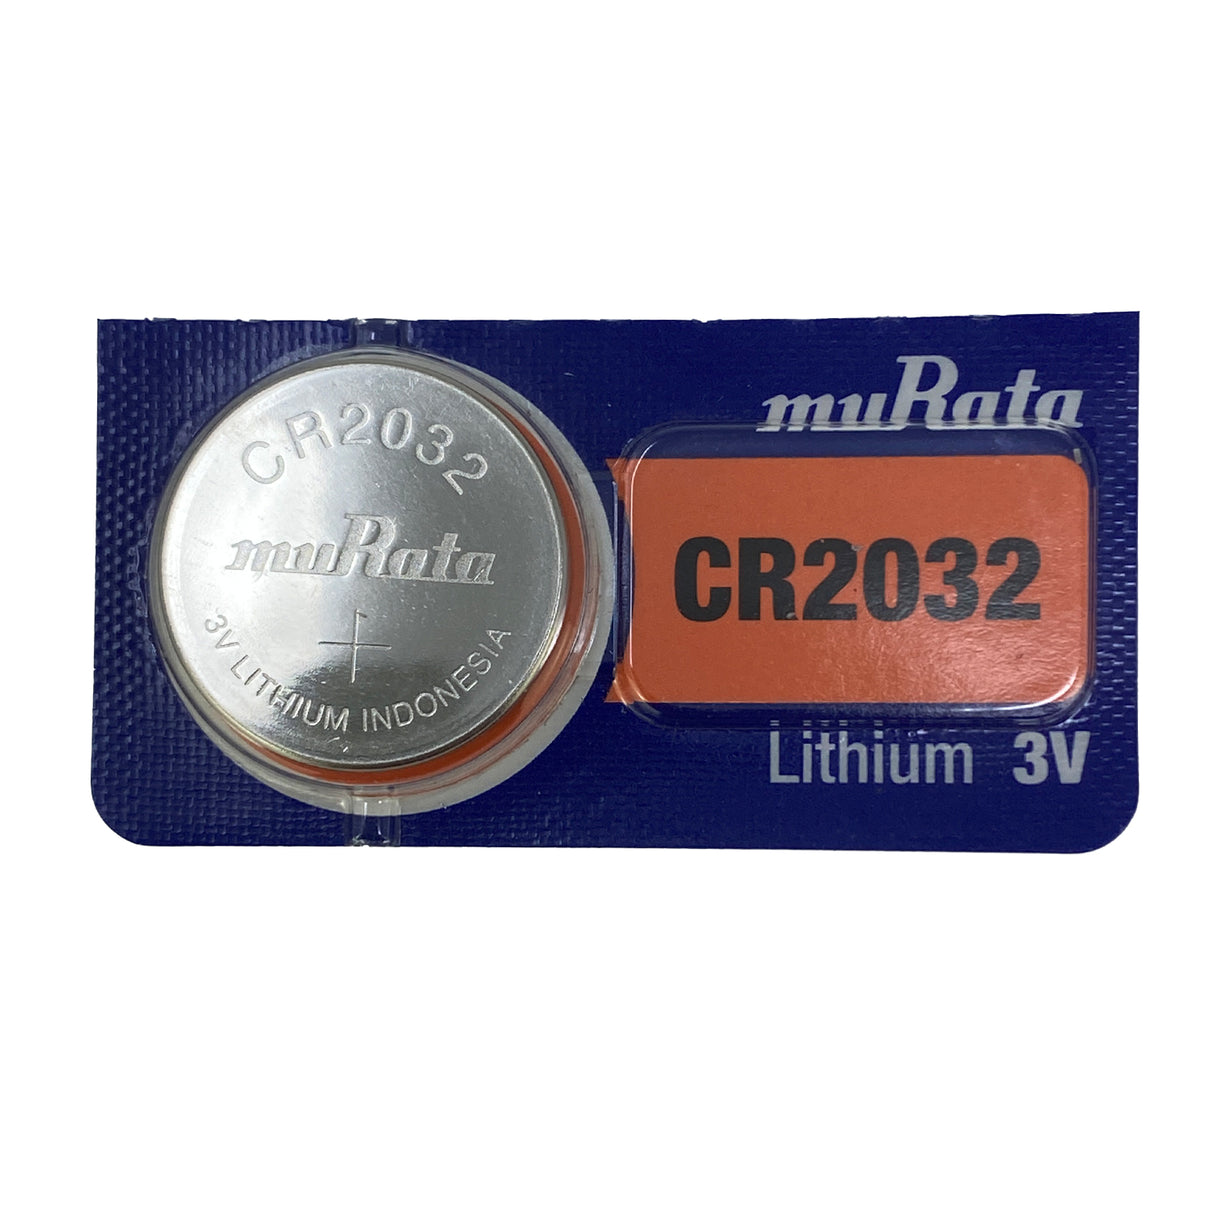 CR2032 Coin Cell Lithium Ion 3V Battery